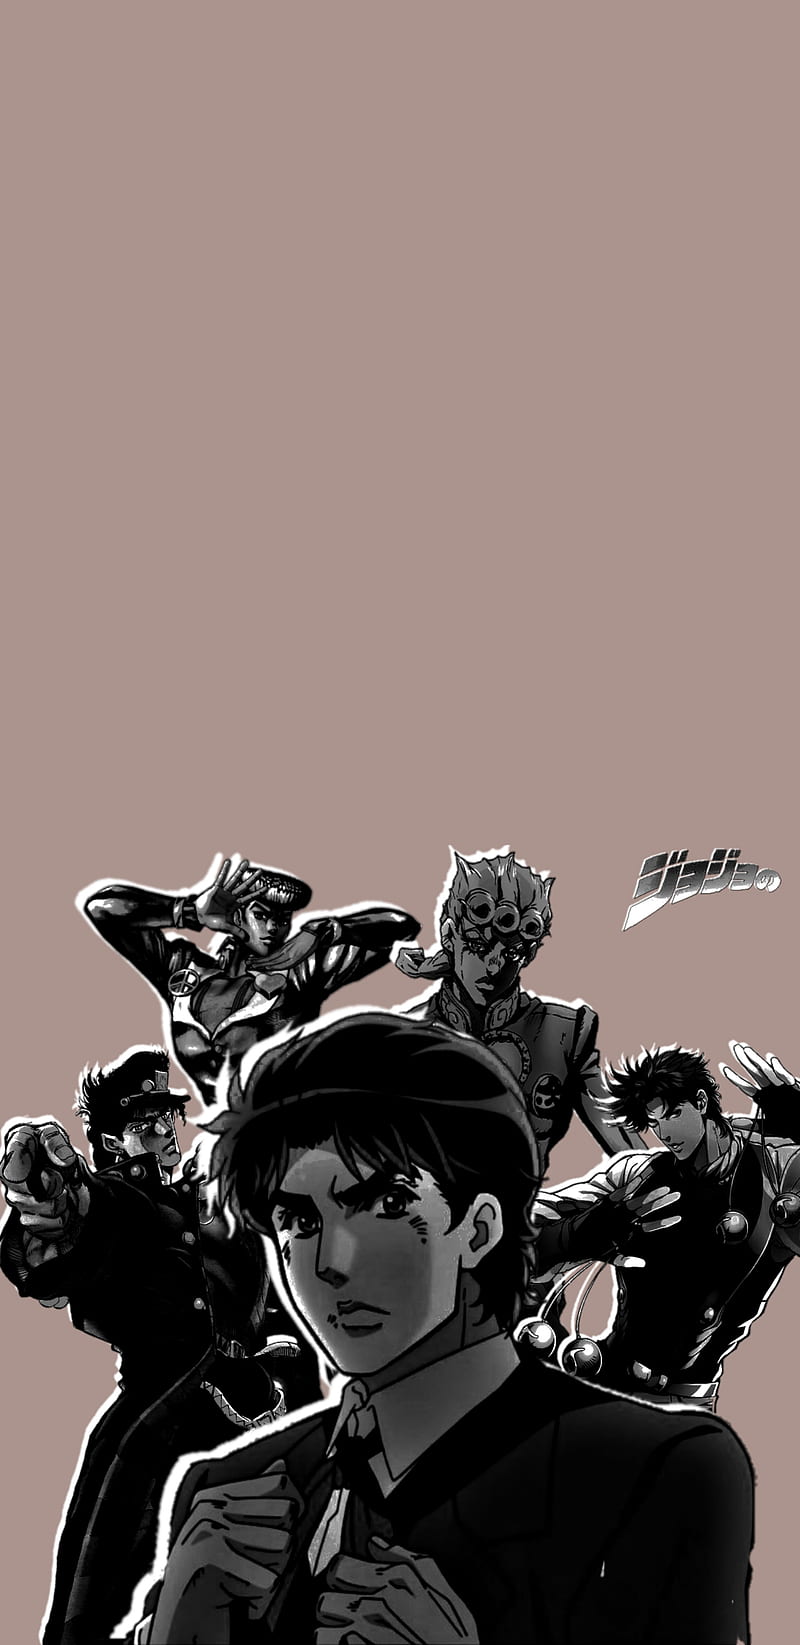 1100 Anime Jojos Bizarre Adventure HD Wallpapers and Backgrounds